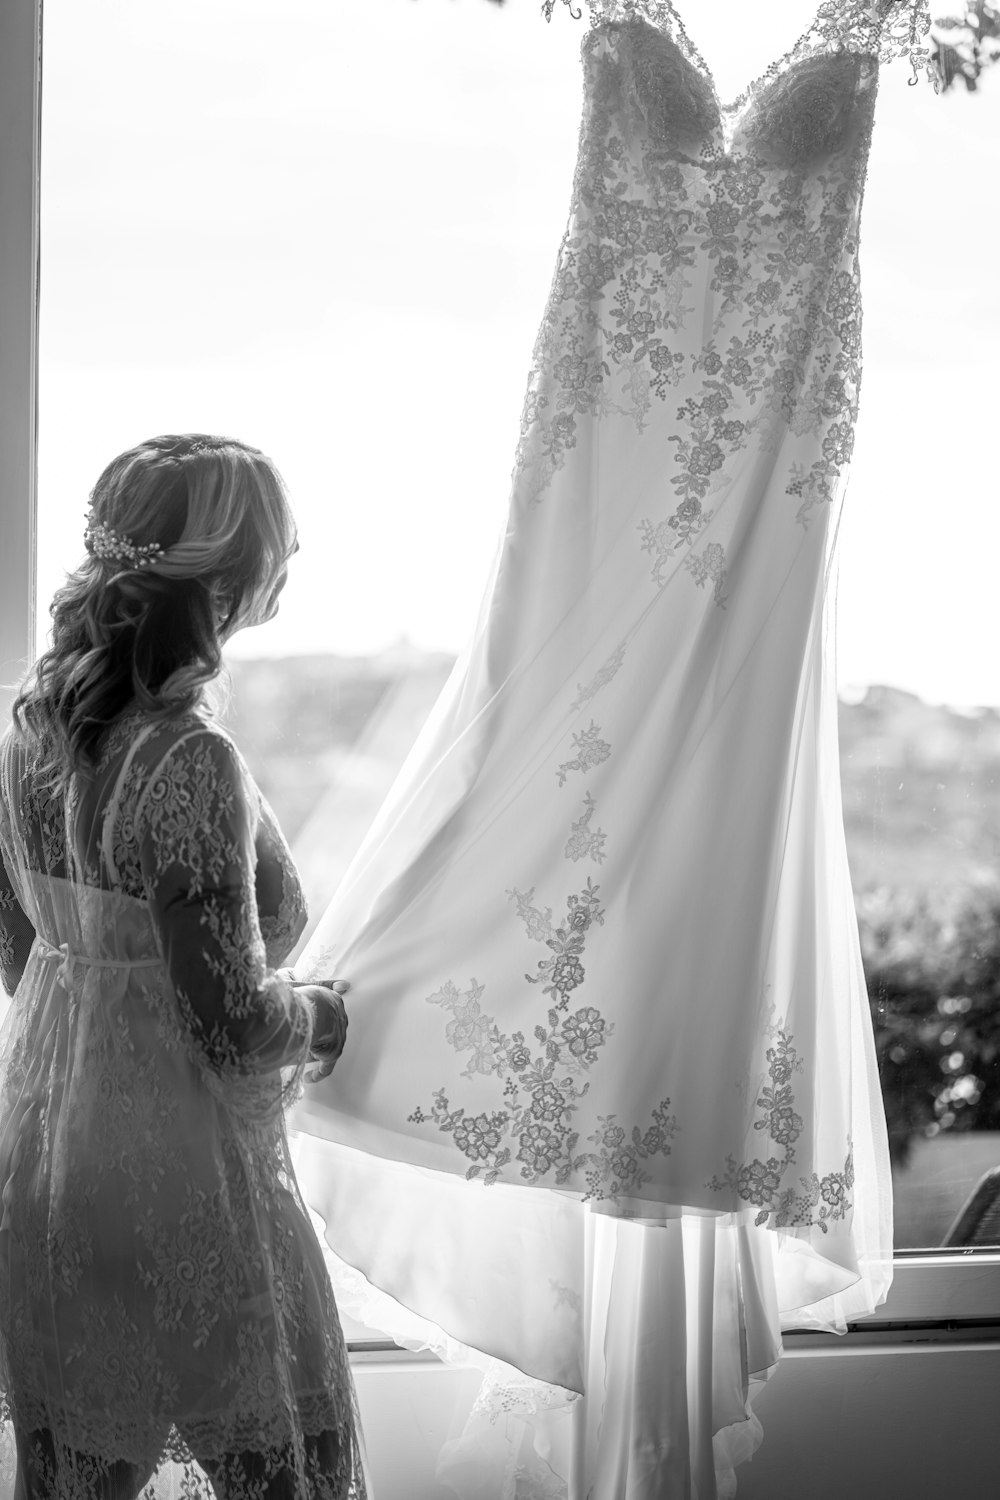 a woman looking at a wedding dress hanging in a window